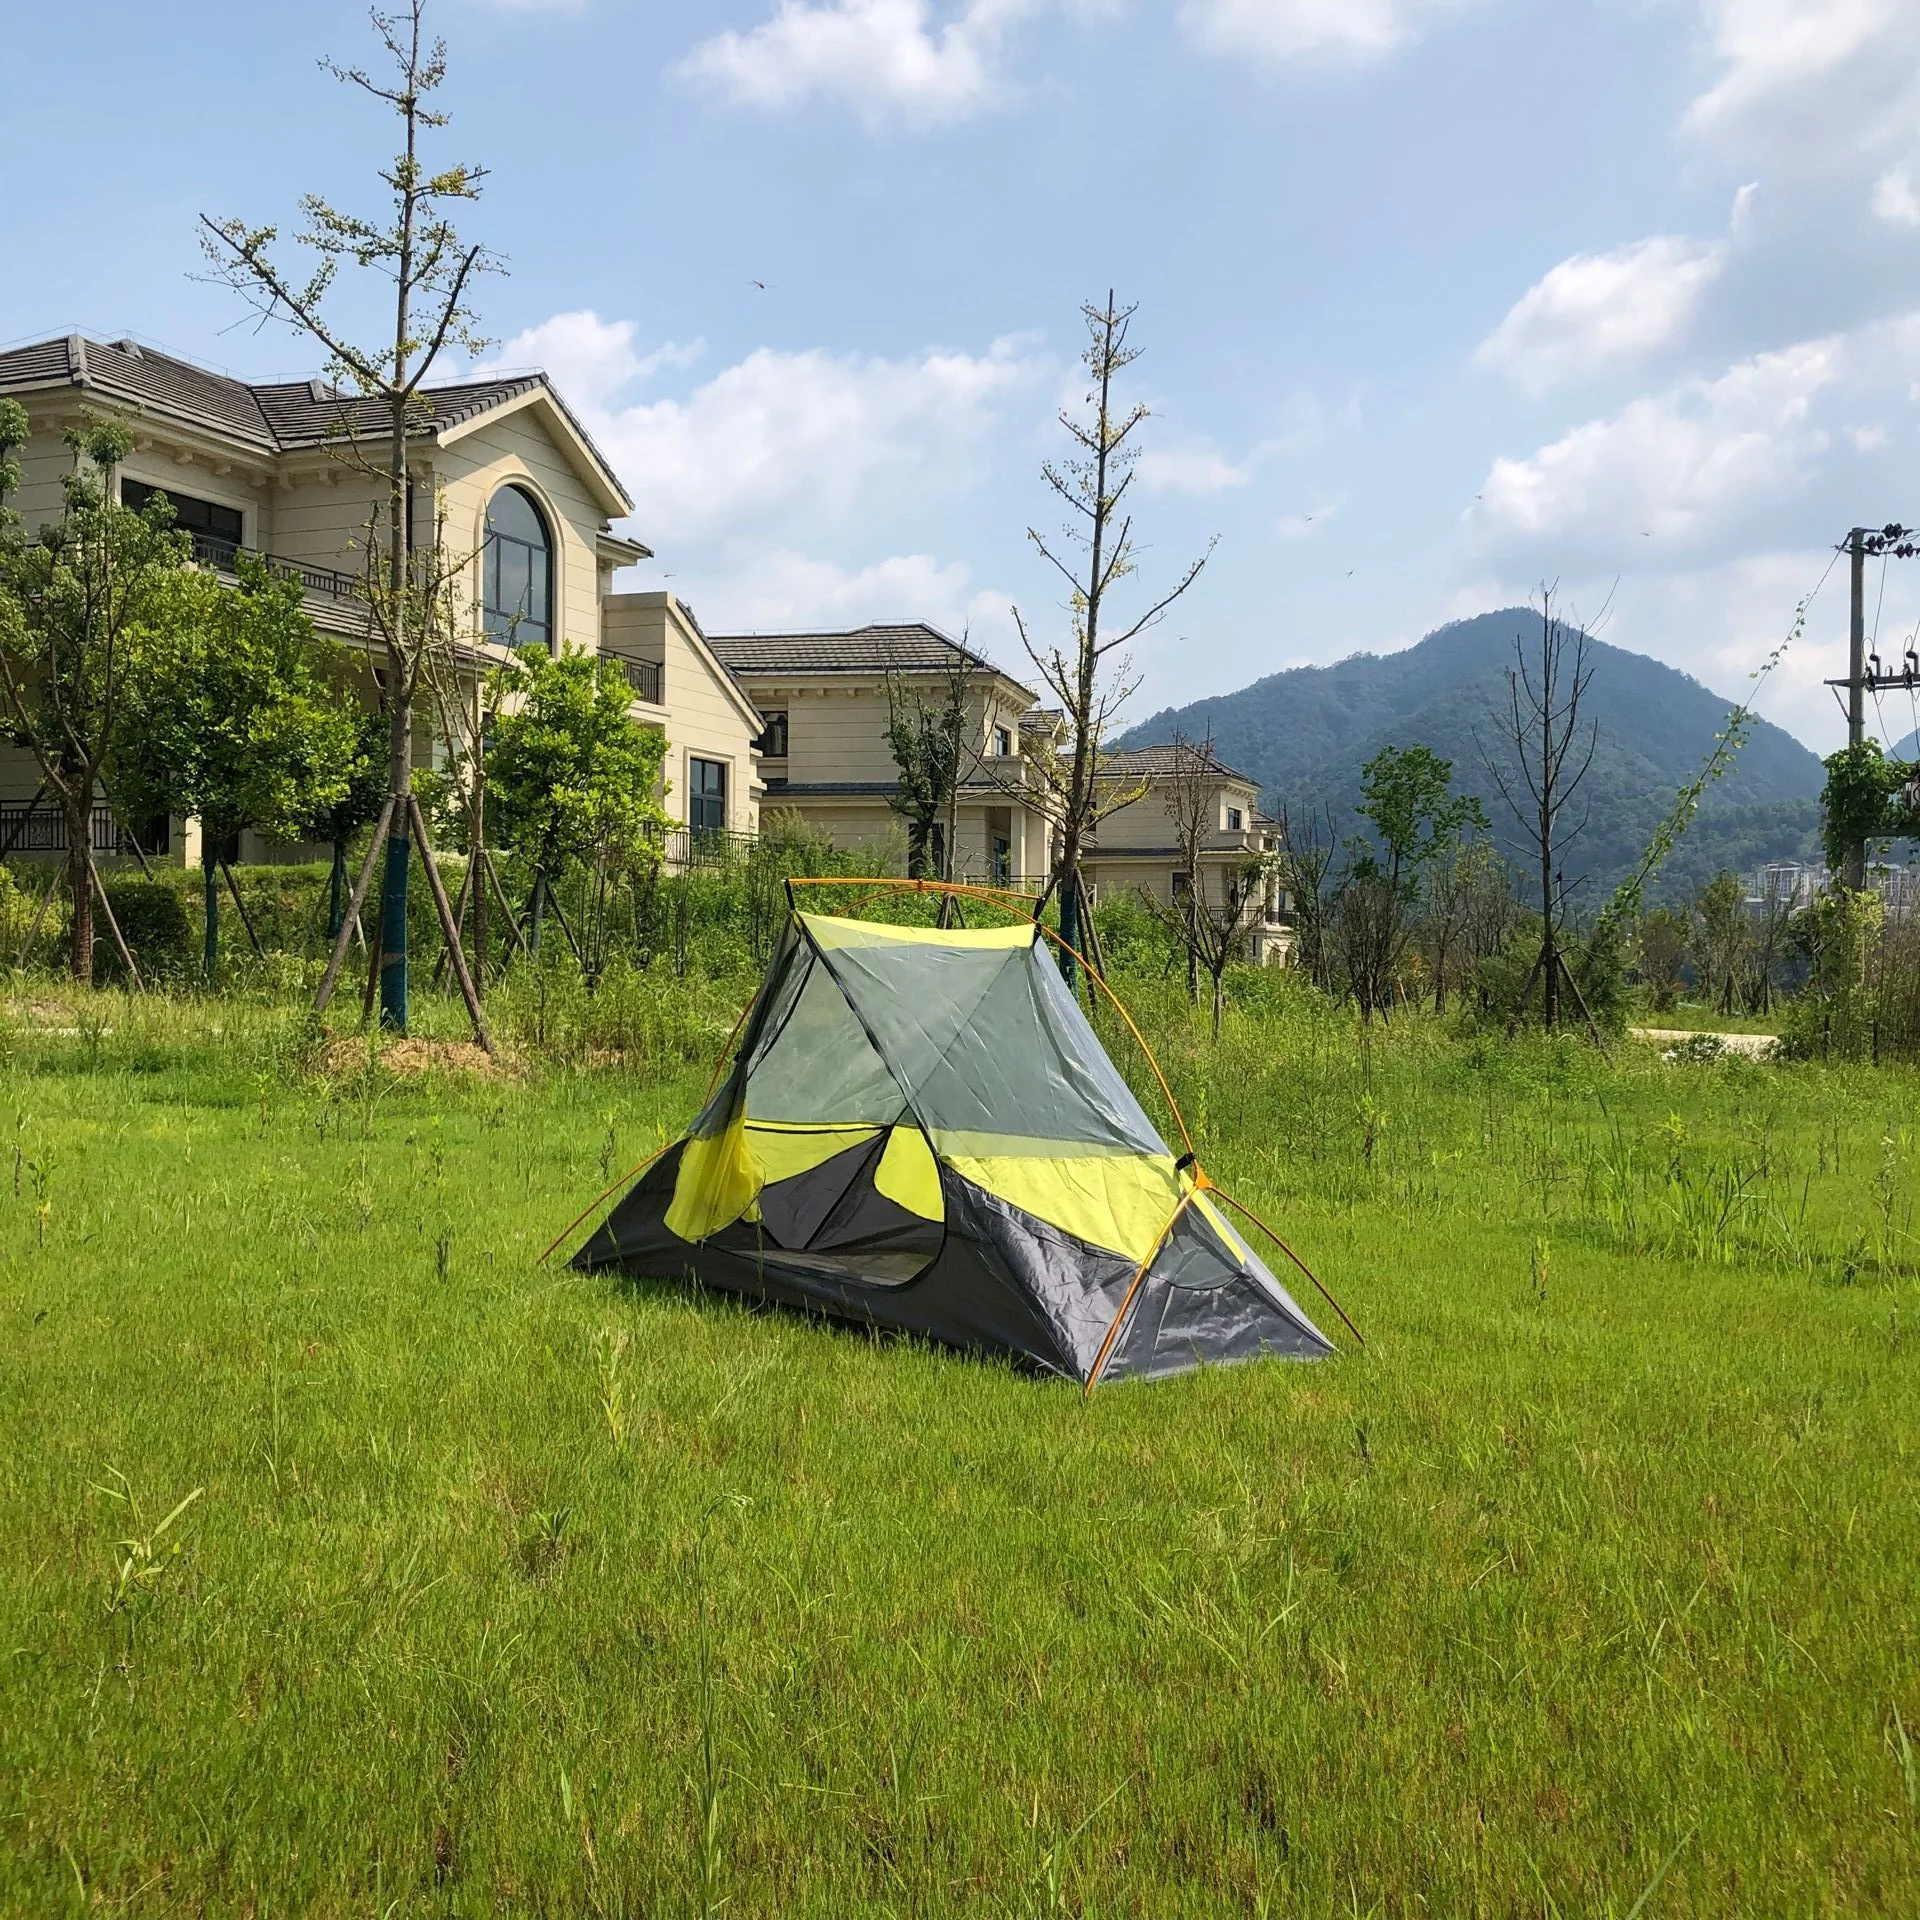 Yellow Color Hubba Hubba Nx 1 Person Lightweight Backpacking Tent,Czx-341 Yellow Camping Tent Come With Matched Footprint - Buy Tent,Msr Hubba Hubba Tent,Msr Product on Alibaba.com